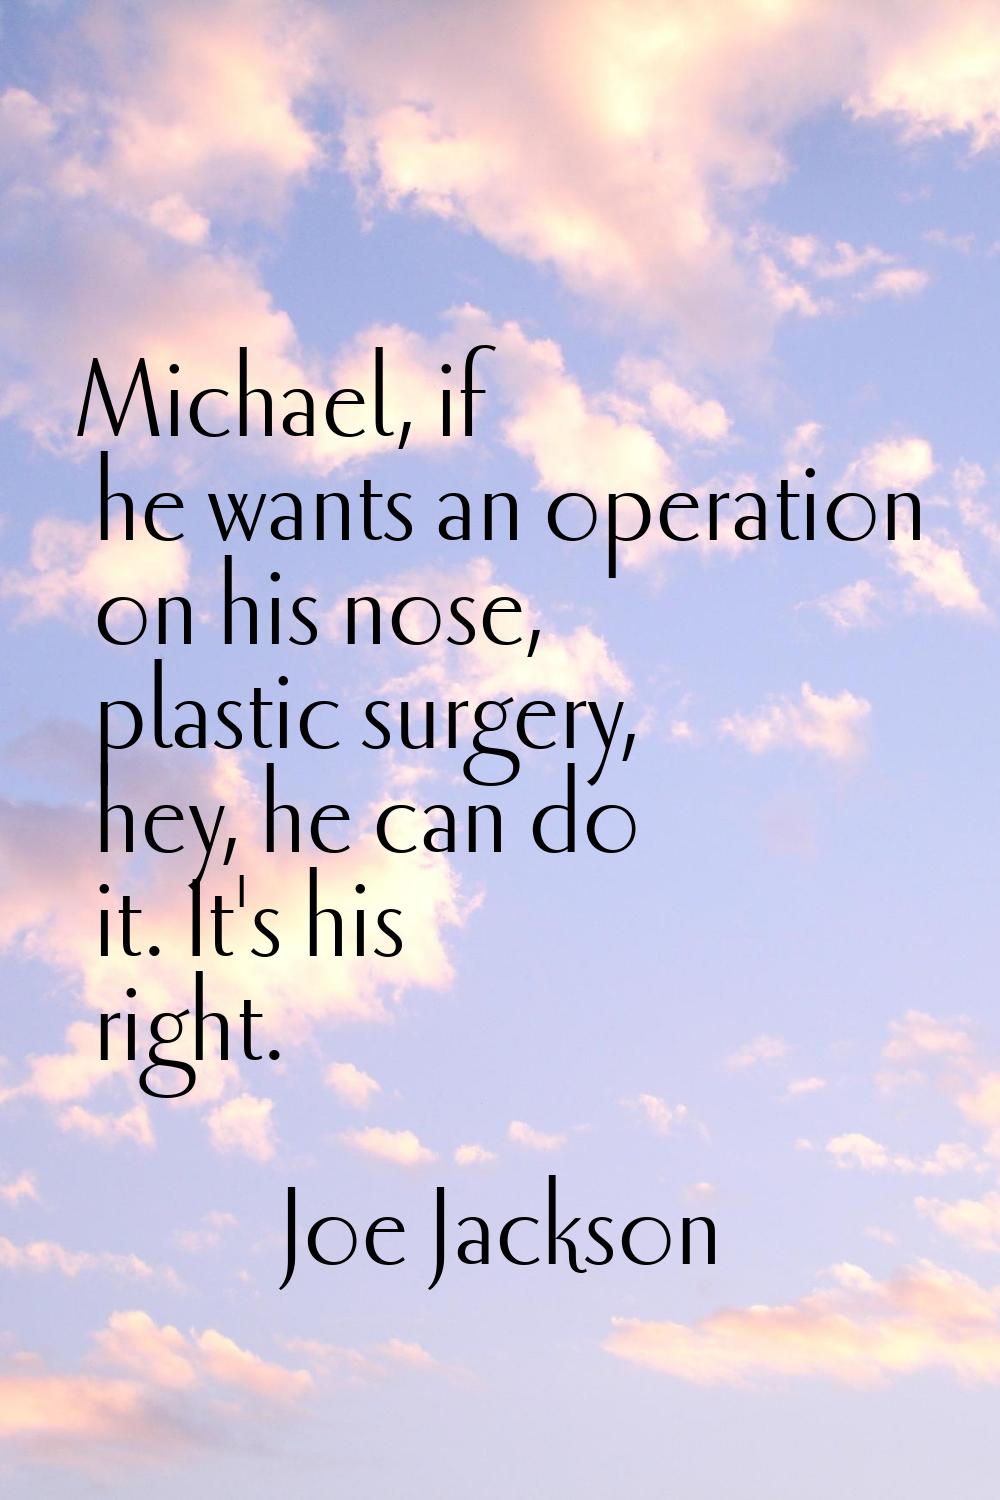 Michael, if he wants an operation on his nose, plastic surgery, hey, he can do it. It's his right.